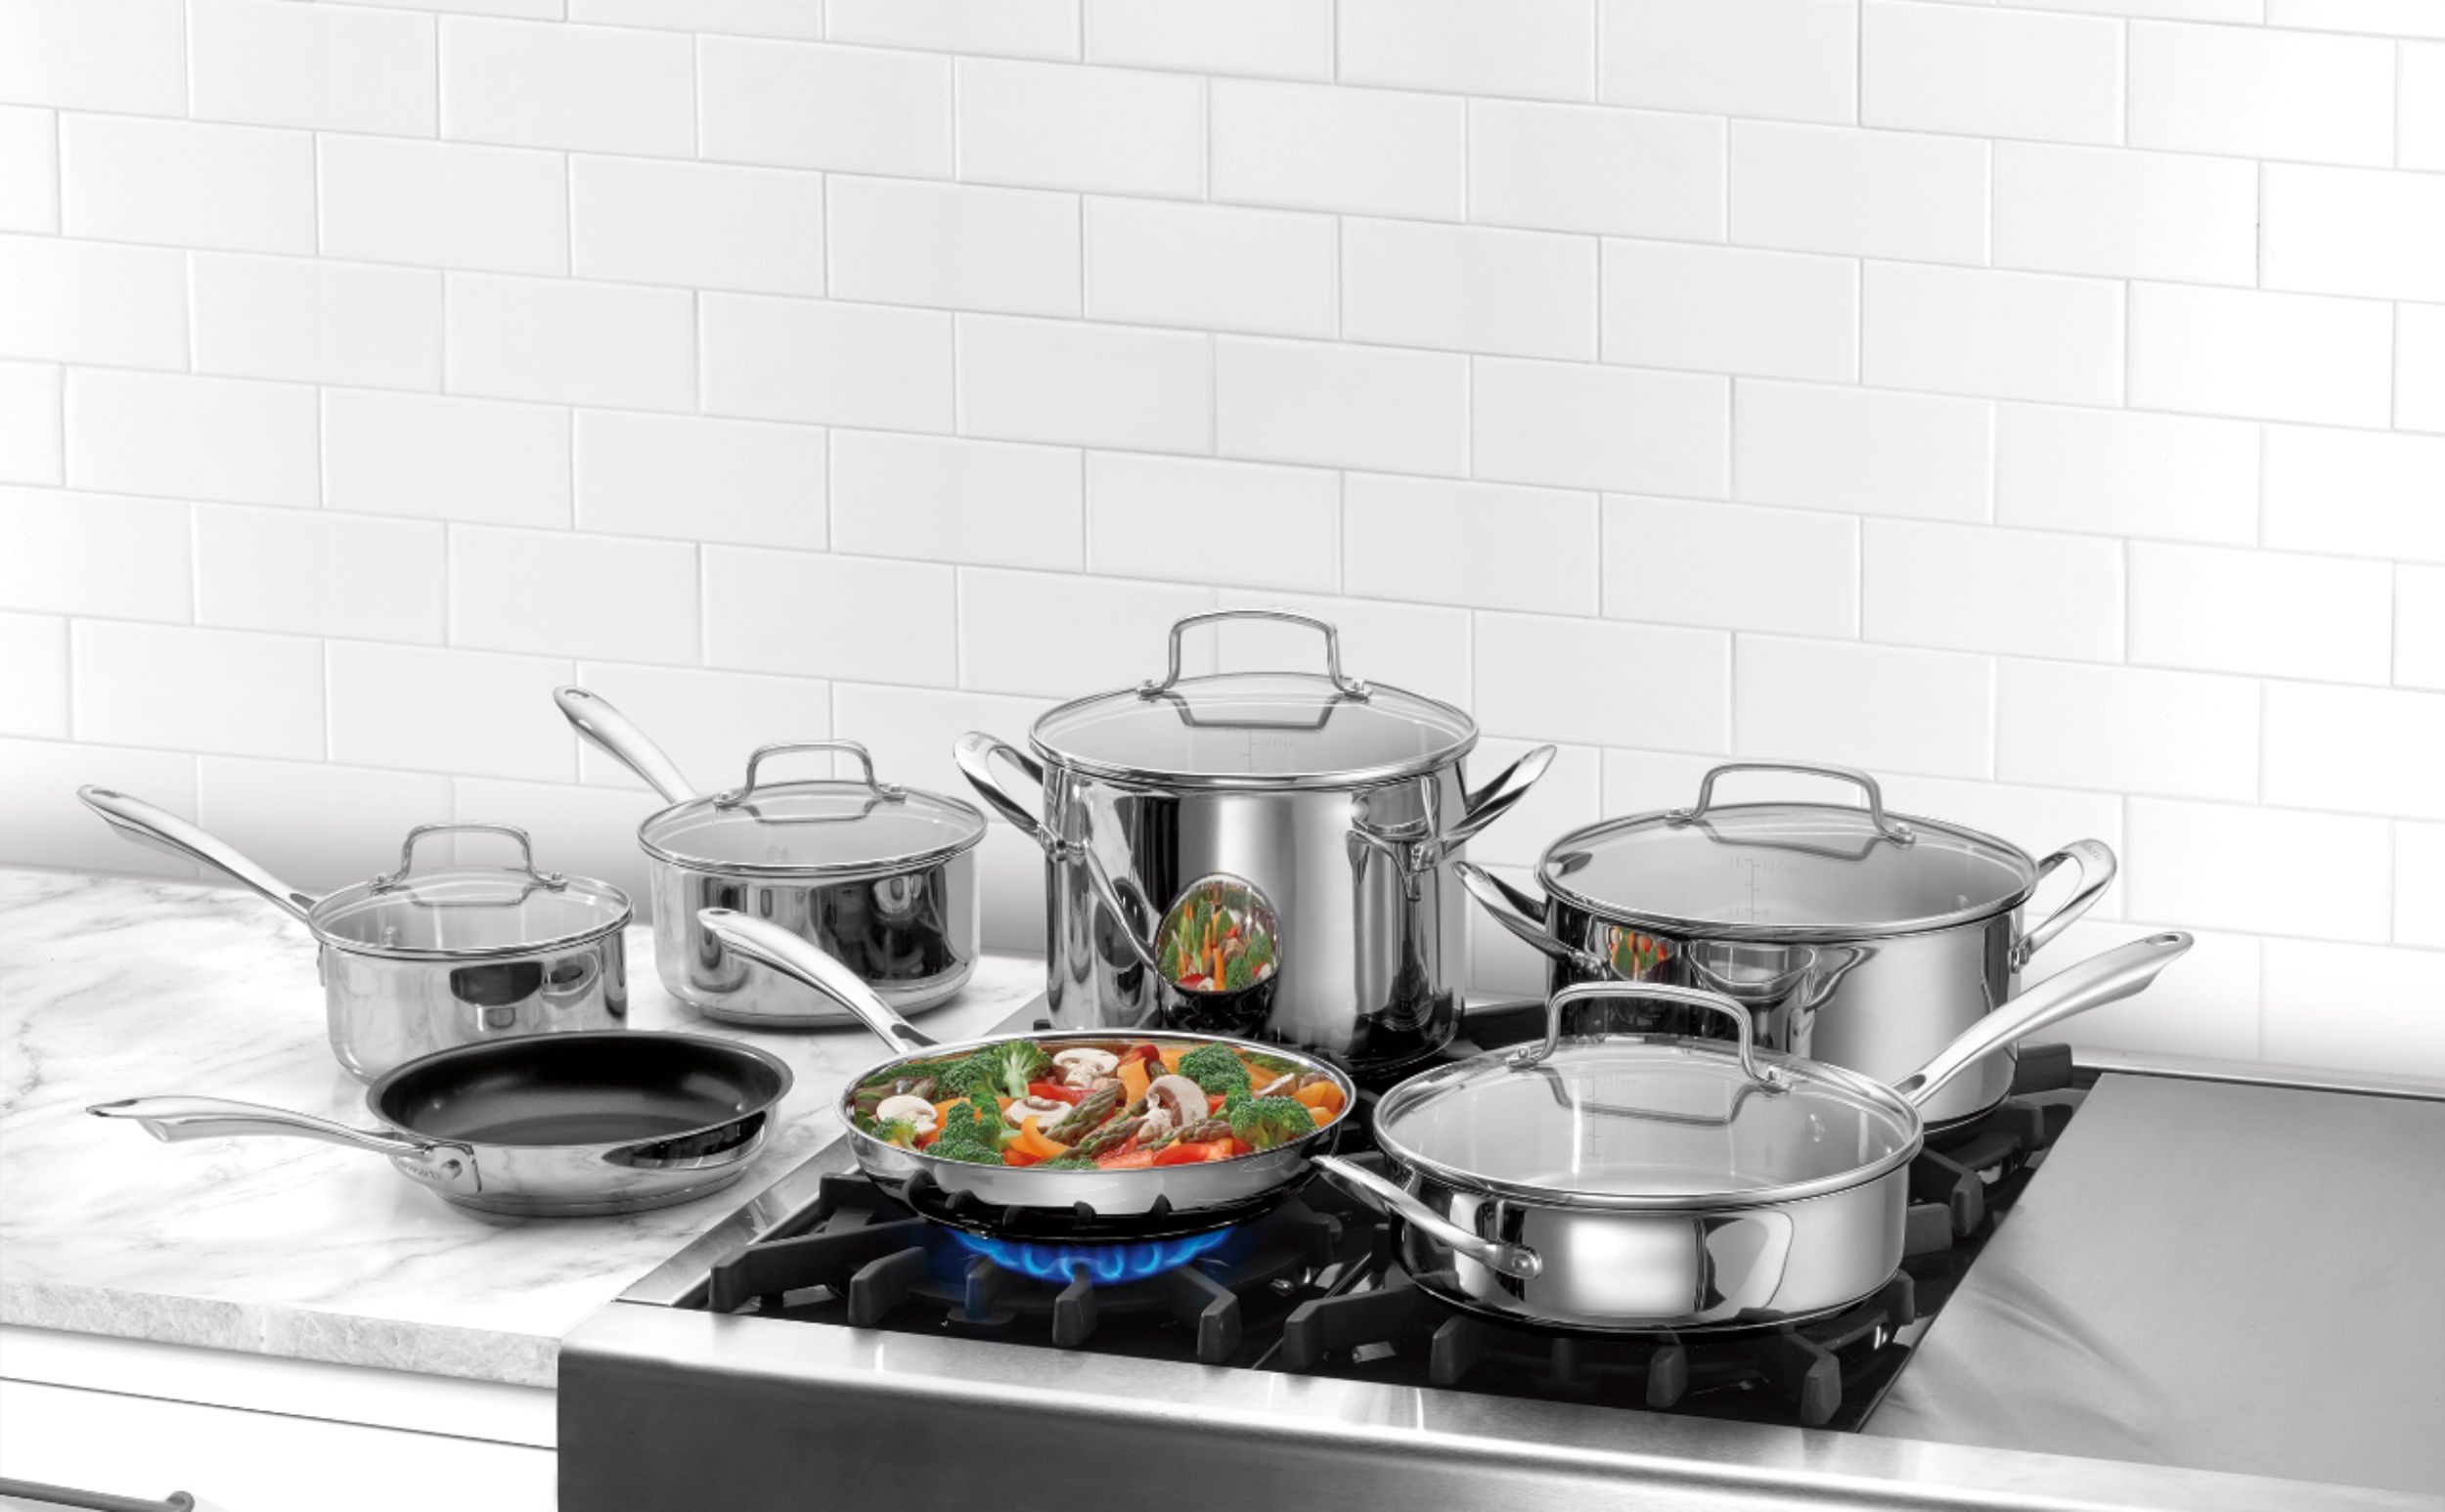 Questions and Answers: Cuisinart 12-Piece Cookware Set Stainless Steel Cuisinart 12 Piece Stainless Steel